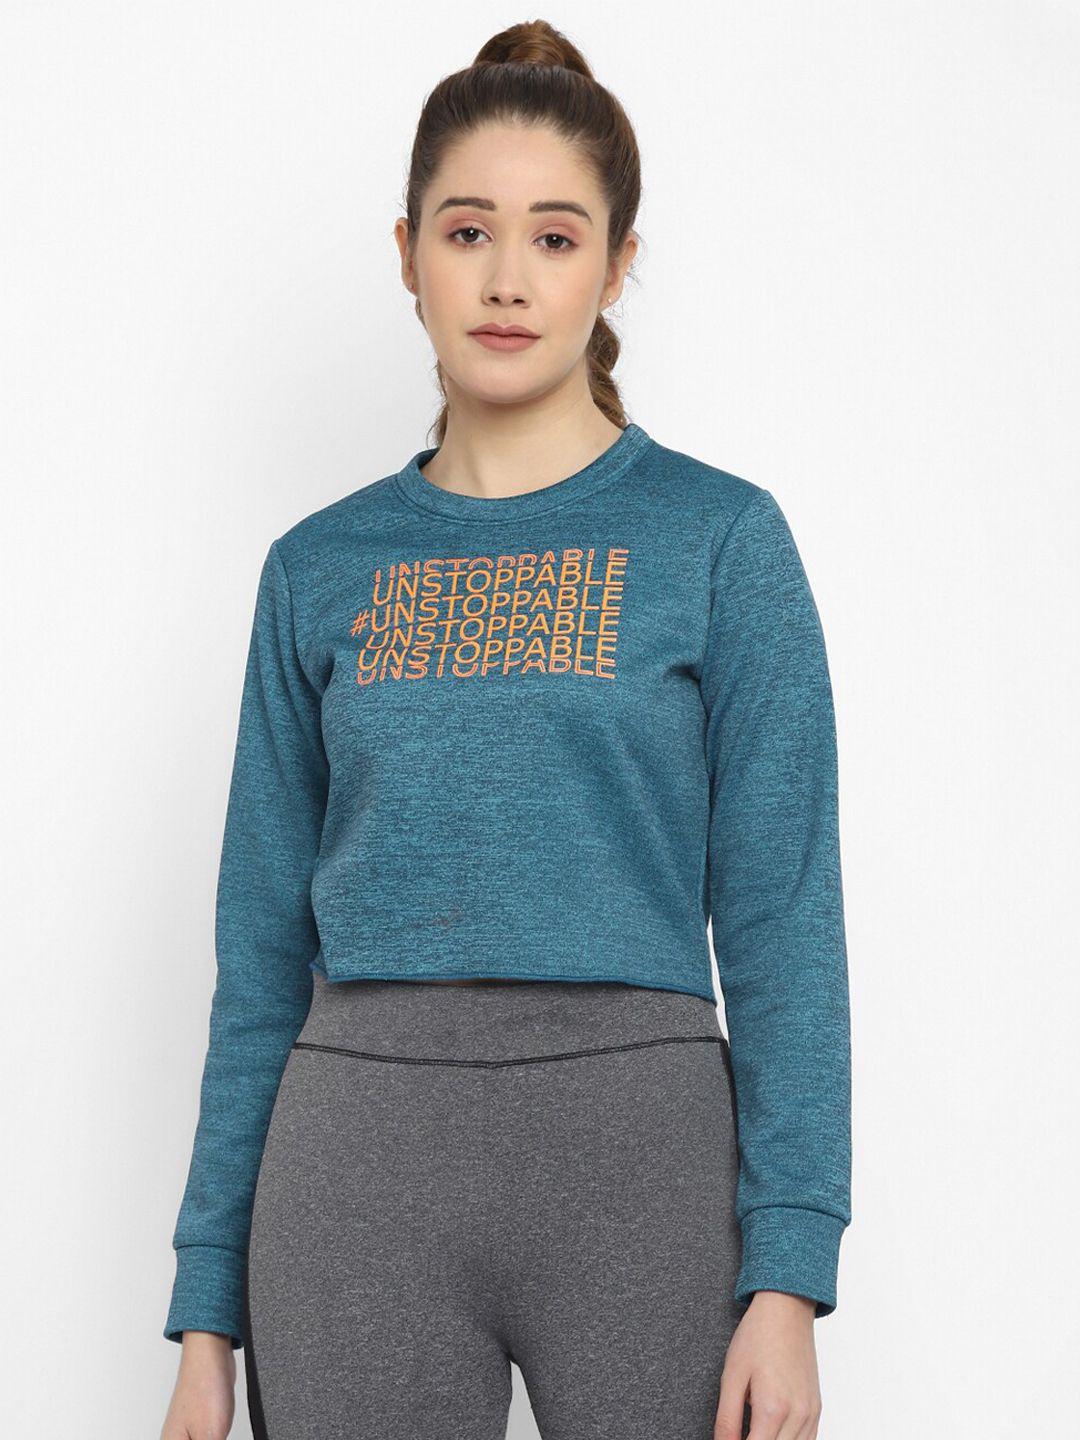 off-limits-women-teal-blue-printed-cropped-sweatshirt